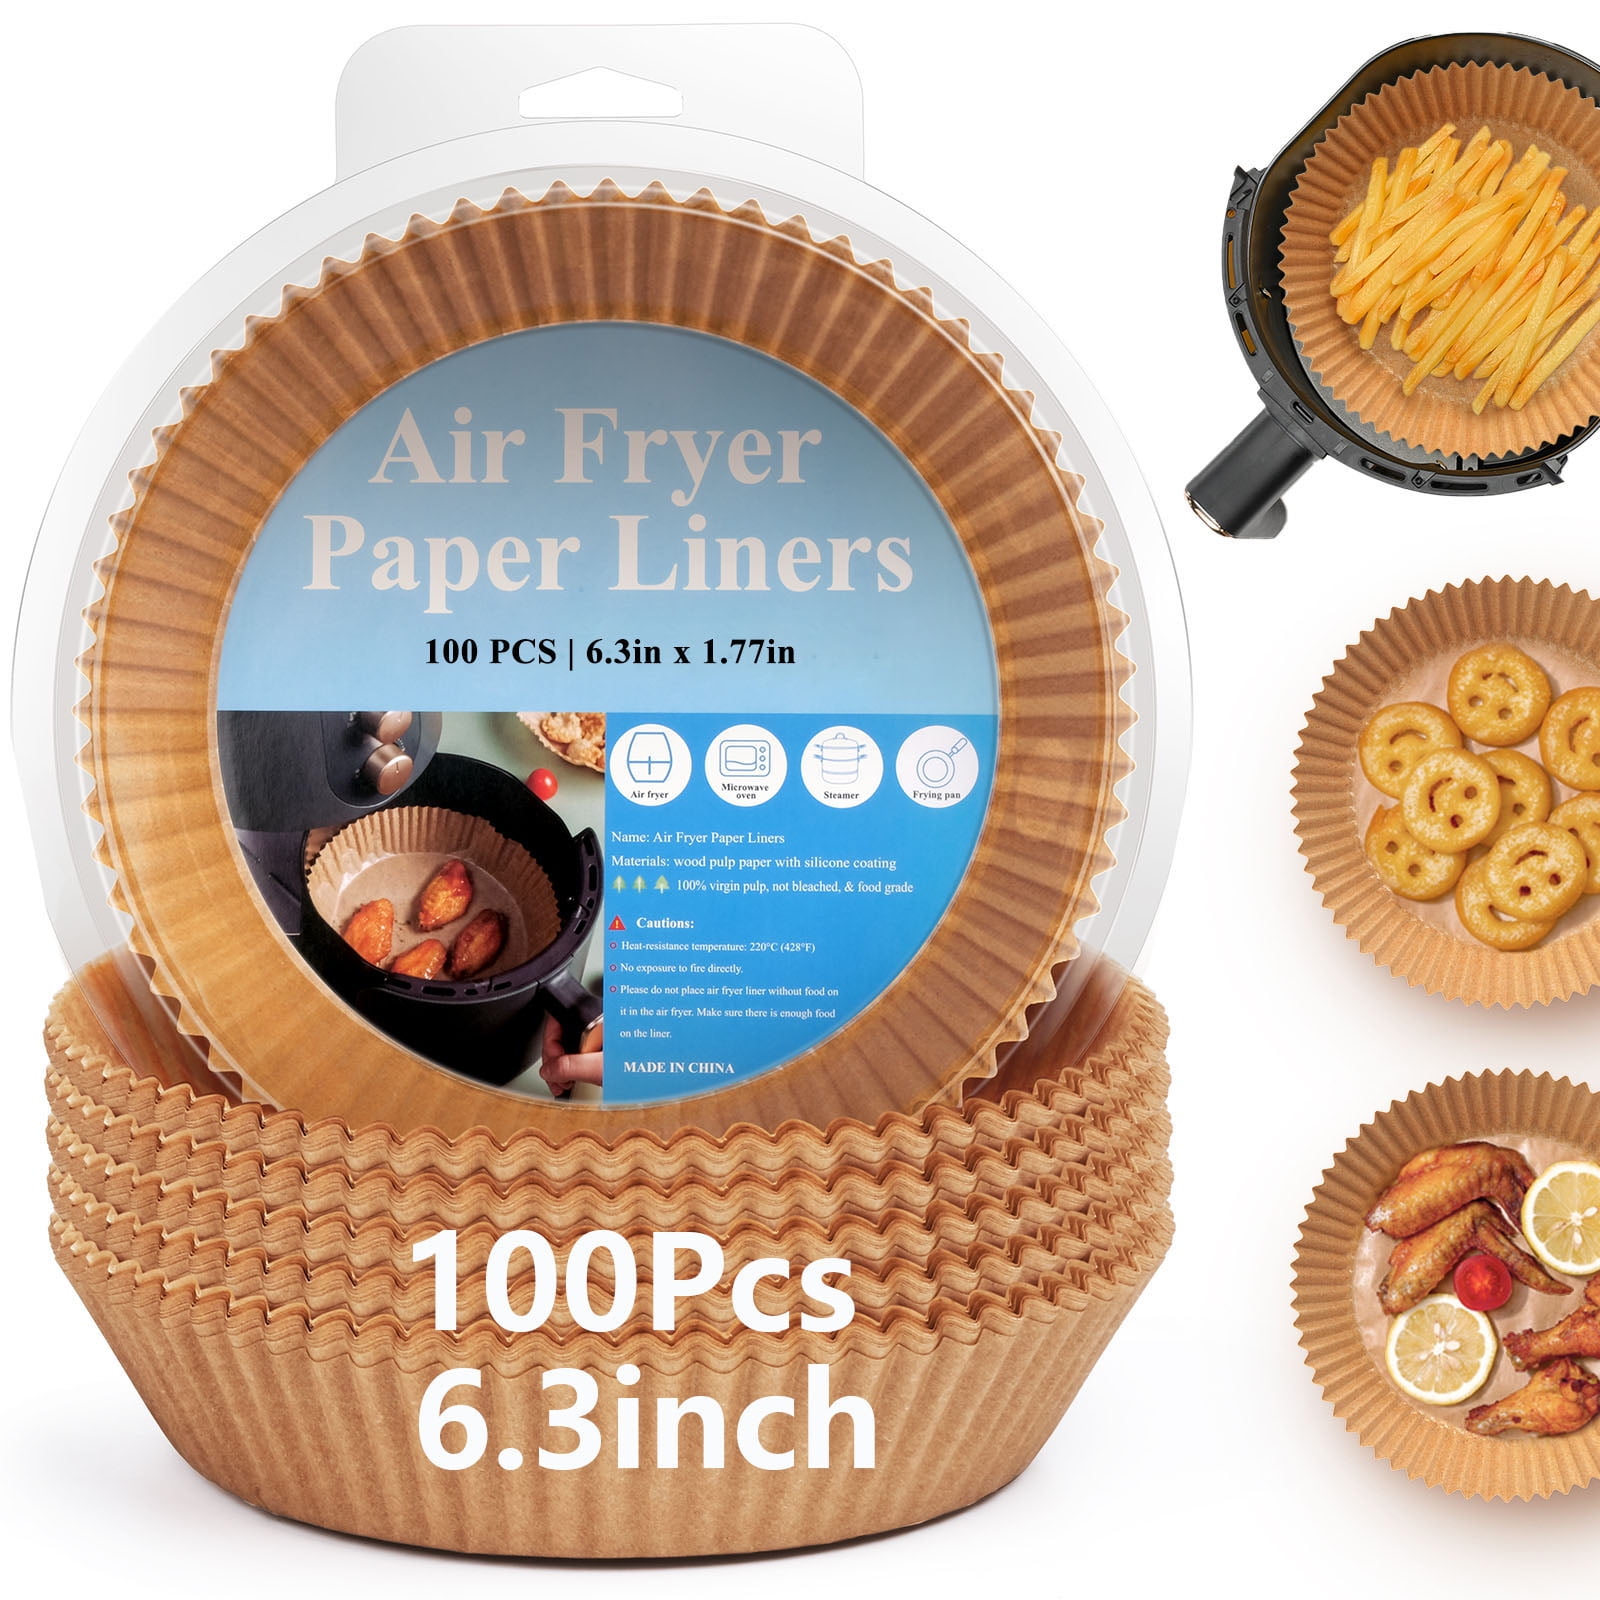 IMHAZ Round Air Fryer Paper Liners Disposable, 120Pcs, 6.3 Inch